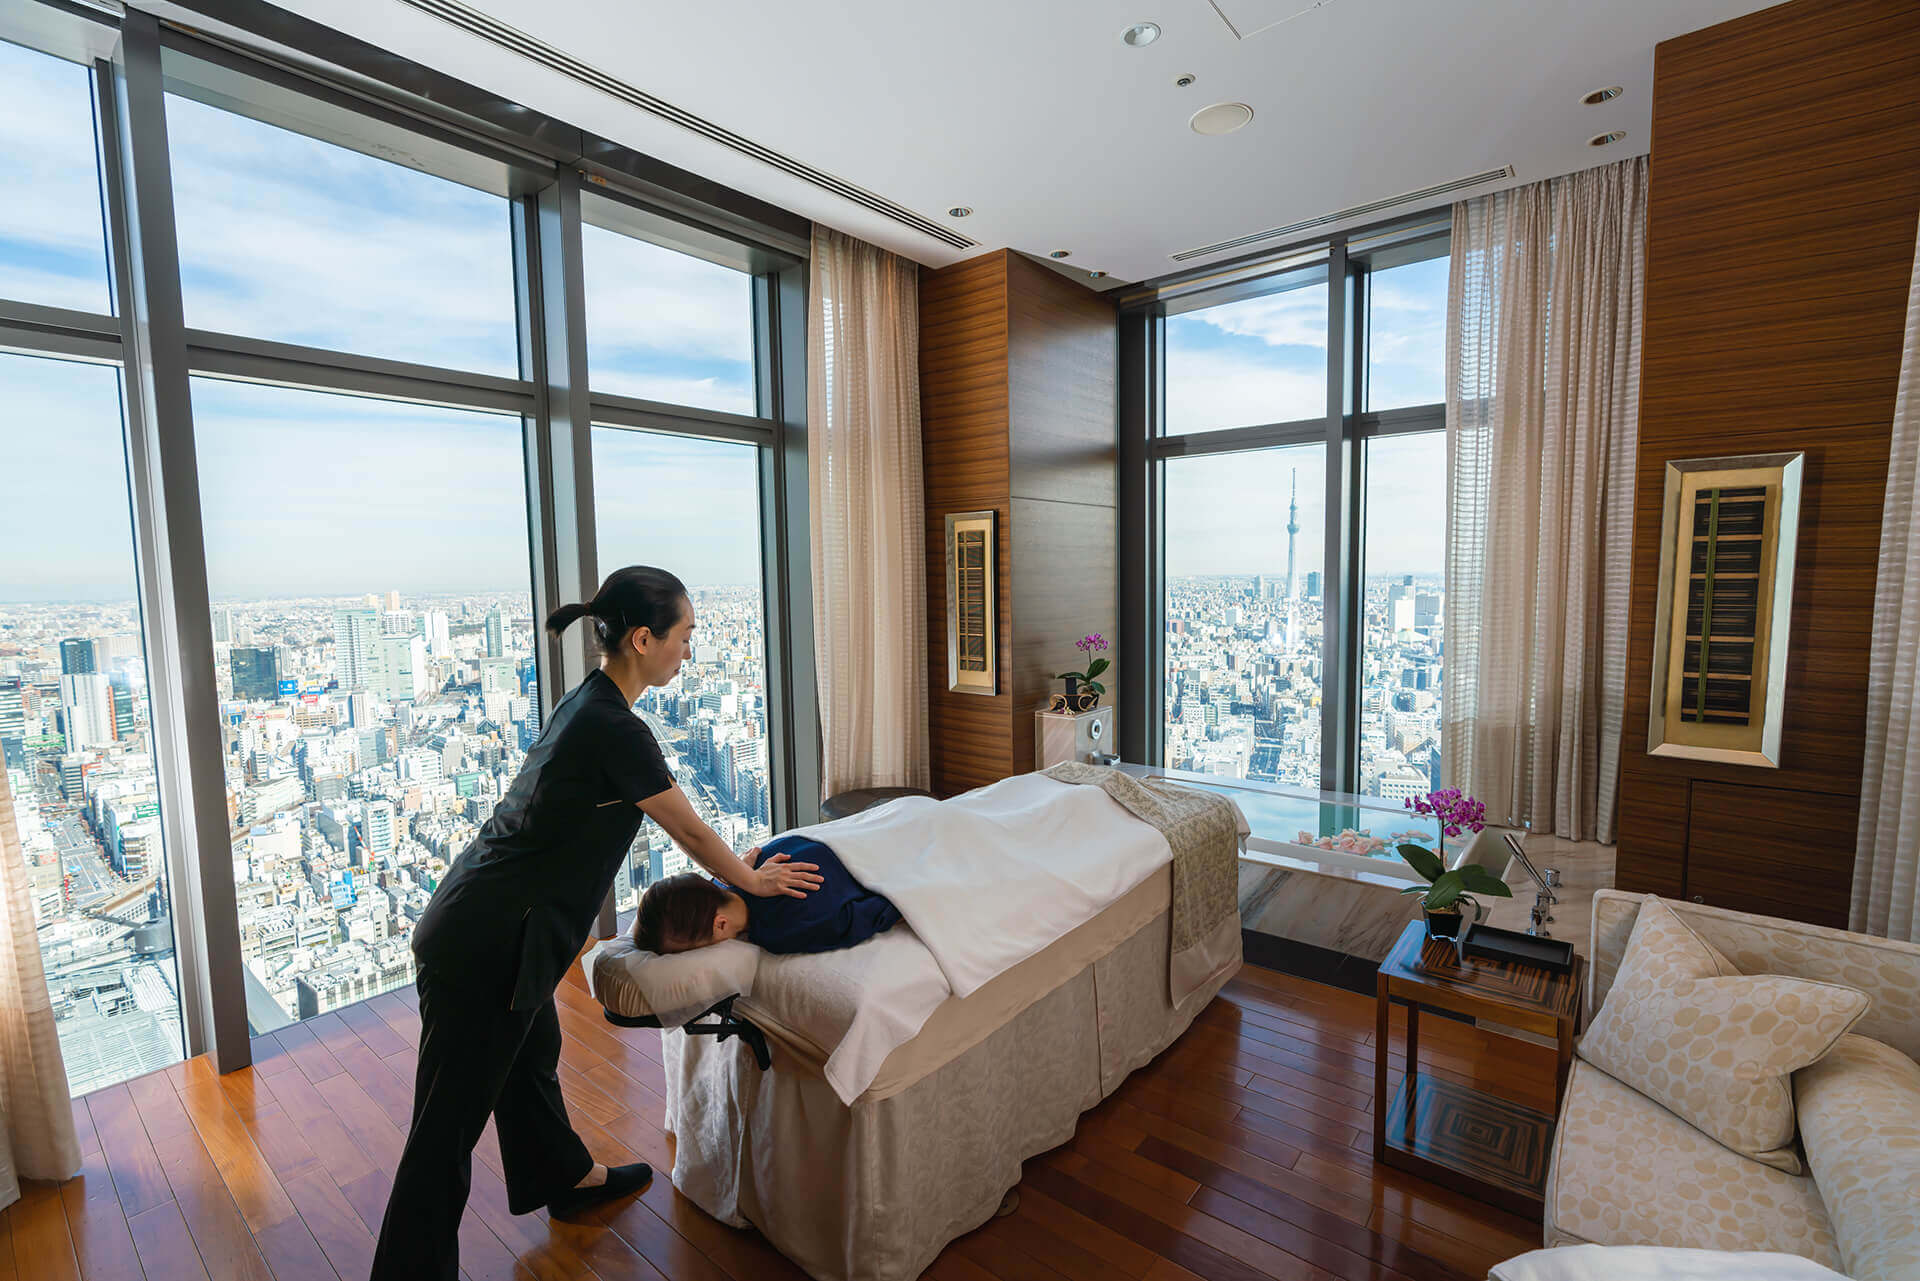 Customer receiving treatment in a room with an amazing view